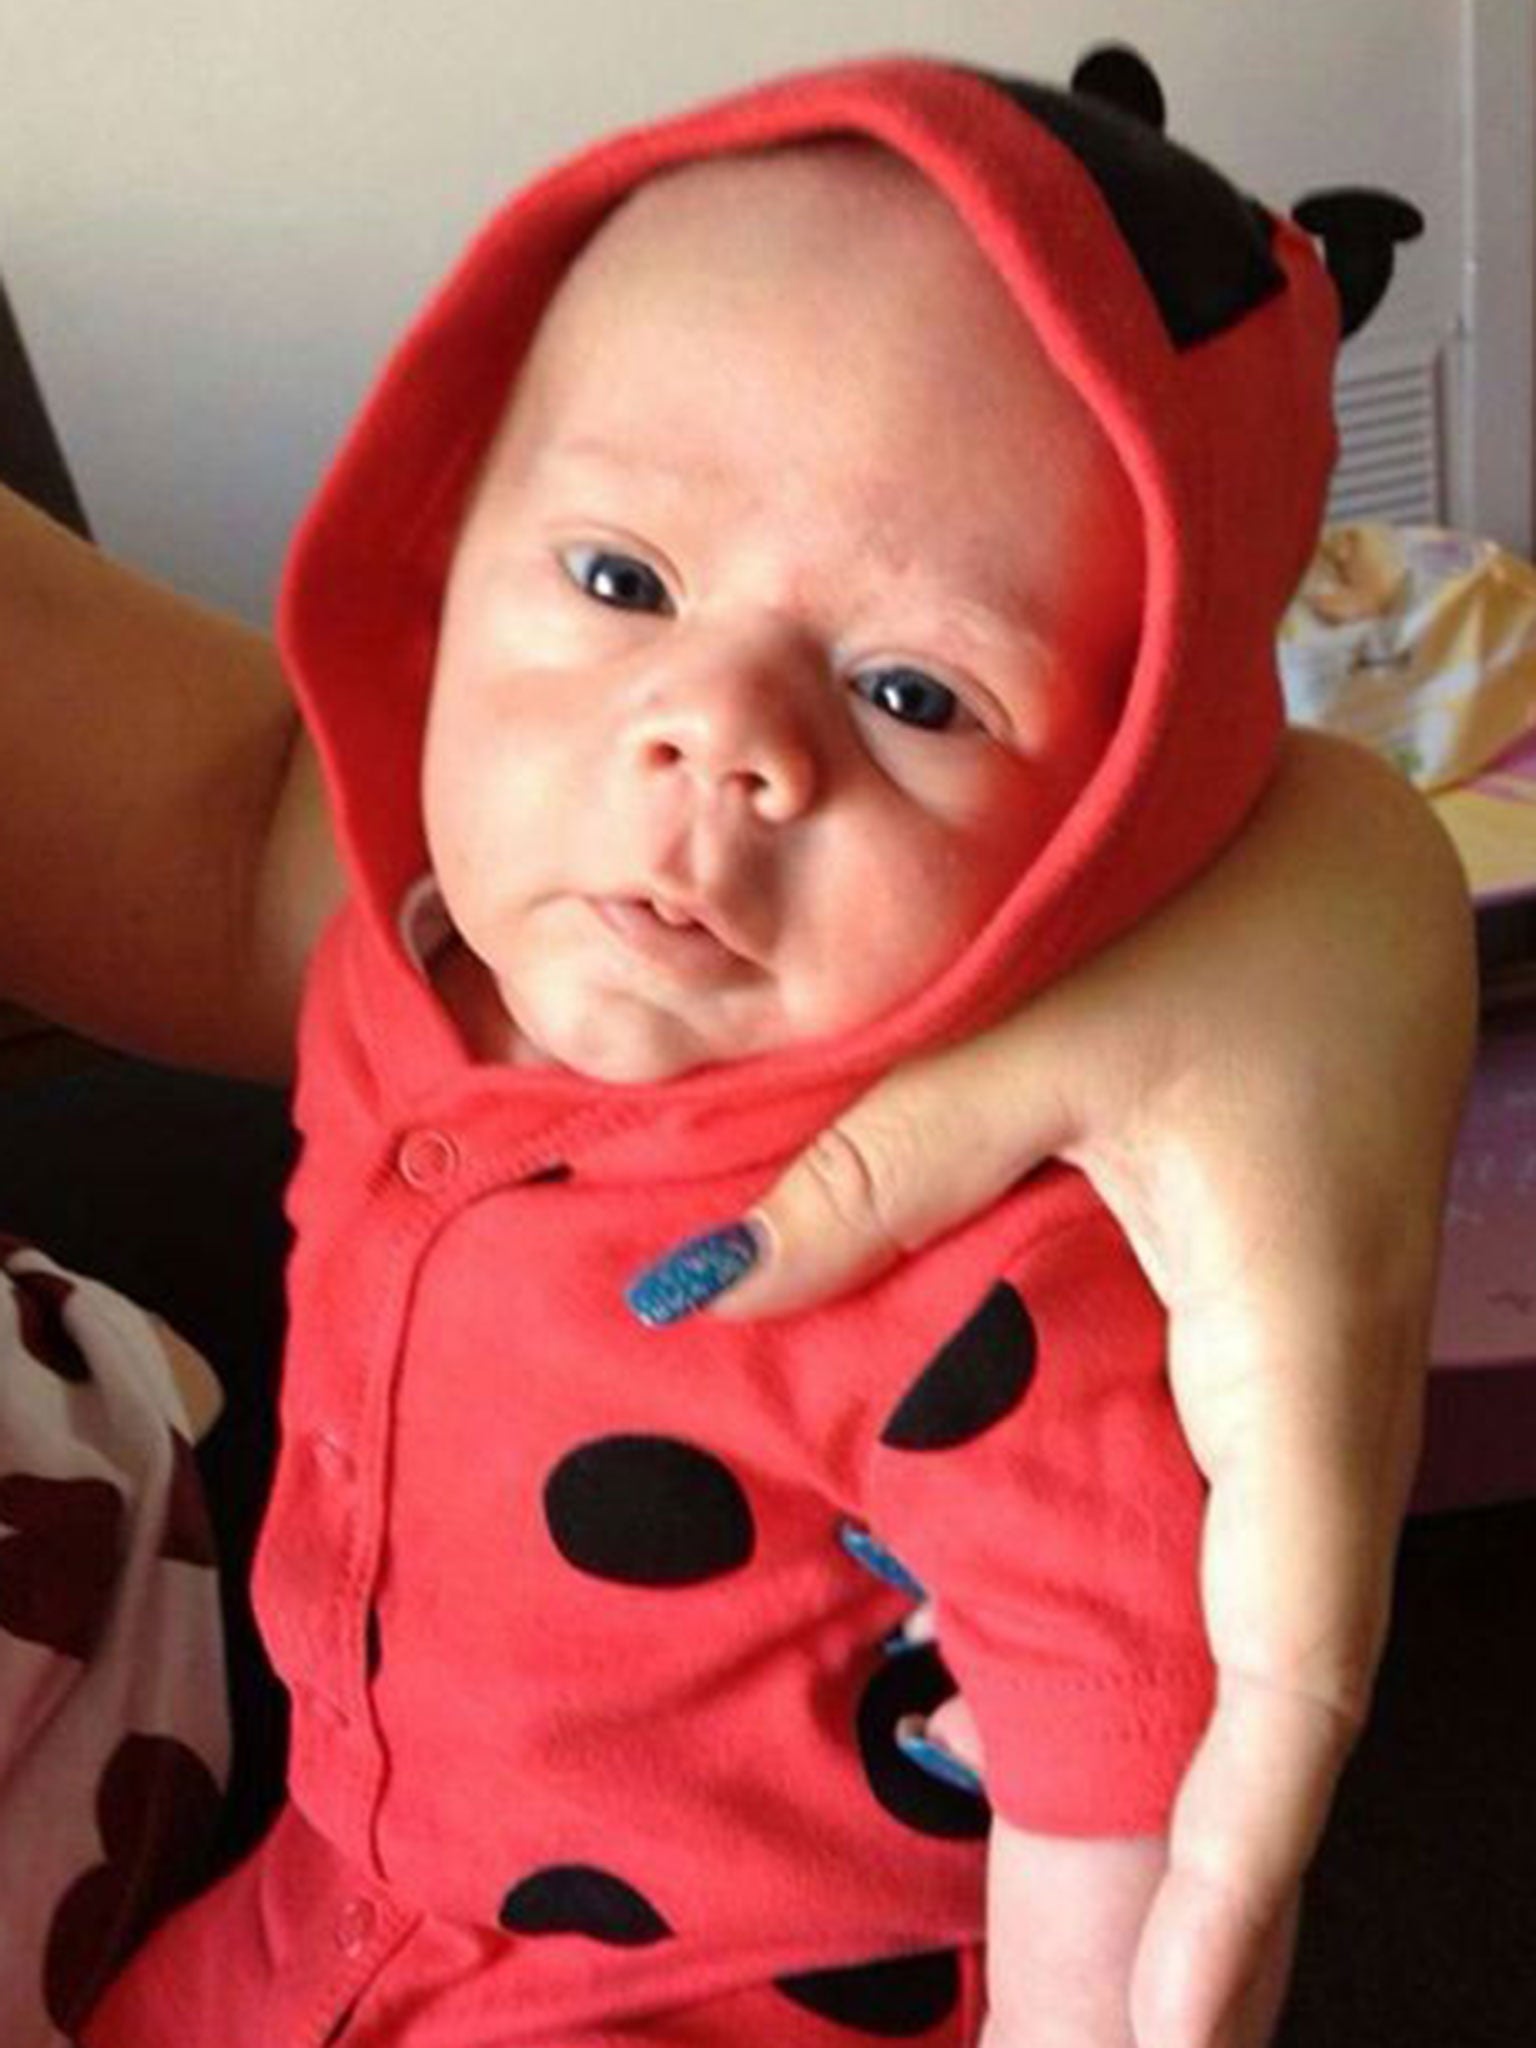 Alfie Rhys Sullock. Michael John Pearce has been found guilty at Newport Crown Court for killing the six-week-old.